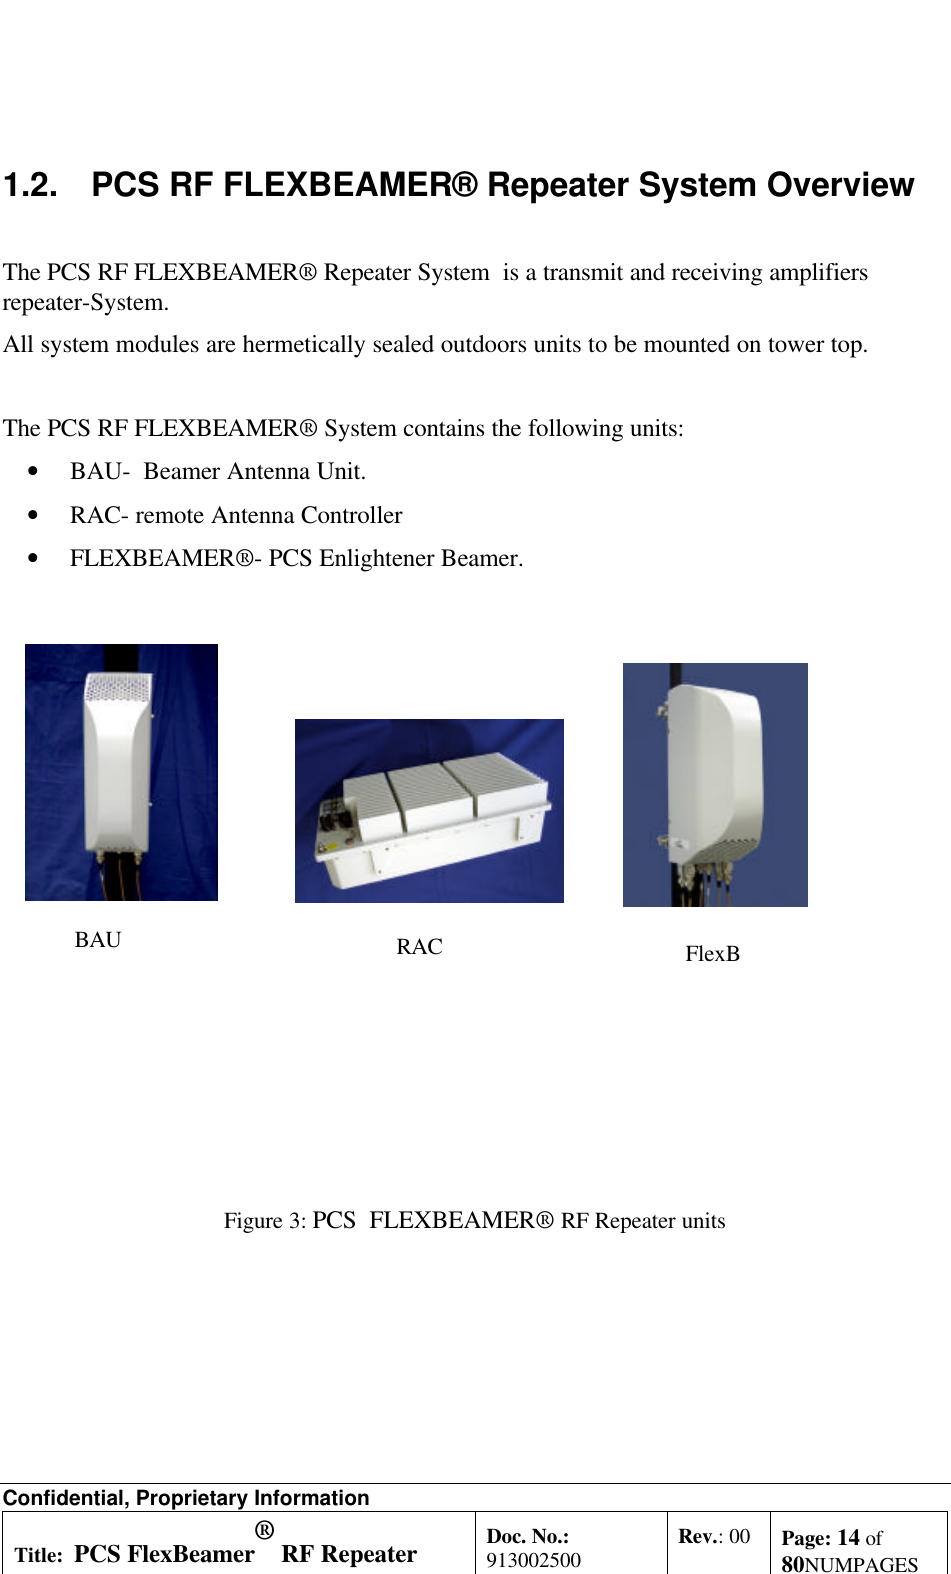 Confidential, Proprietary InformationTitle: PCS FlexBeamer® RF RepeaterSystem A &amp;O ManualDoc. No.:913002500 Rev.: 00 Page: 14 of80NUMPAGES1.2. PCS RF FLEXBEAMER® Repeater System OverviewThe PCS RF FLEXBEAMER® Repeater System  is a transmit and receiving amplifiersrepeater-System.All system modules are hermetically sealed outdoors units to be mounted on tower top.The PCS RF FLEXBEAMER® System contains the following units: • BAU-  Beamer Antenna Unit. • RAC- remote Antenna Controller • FLEXBEAMER®- PCS Enlightener Beamer.Figure 3: PCS  FLEXBEAMER® RF Repeater unitsBAU FlexBeamerRAC